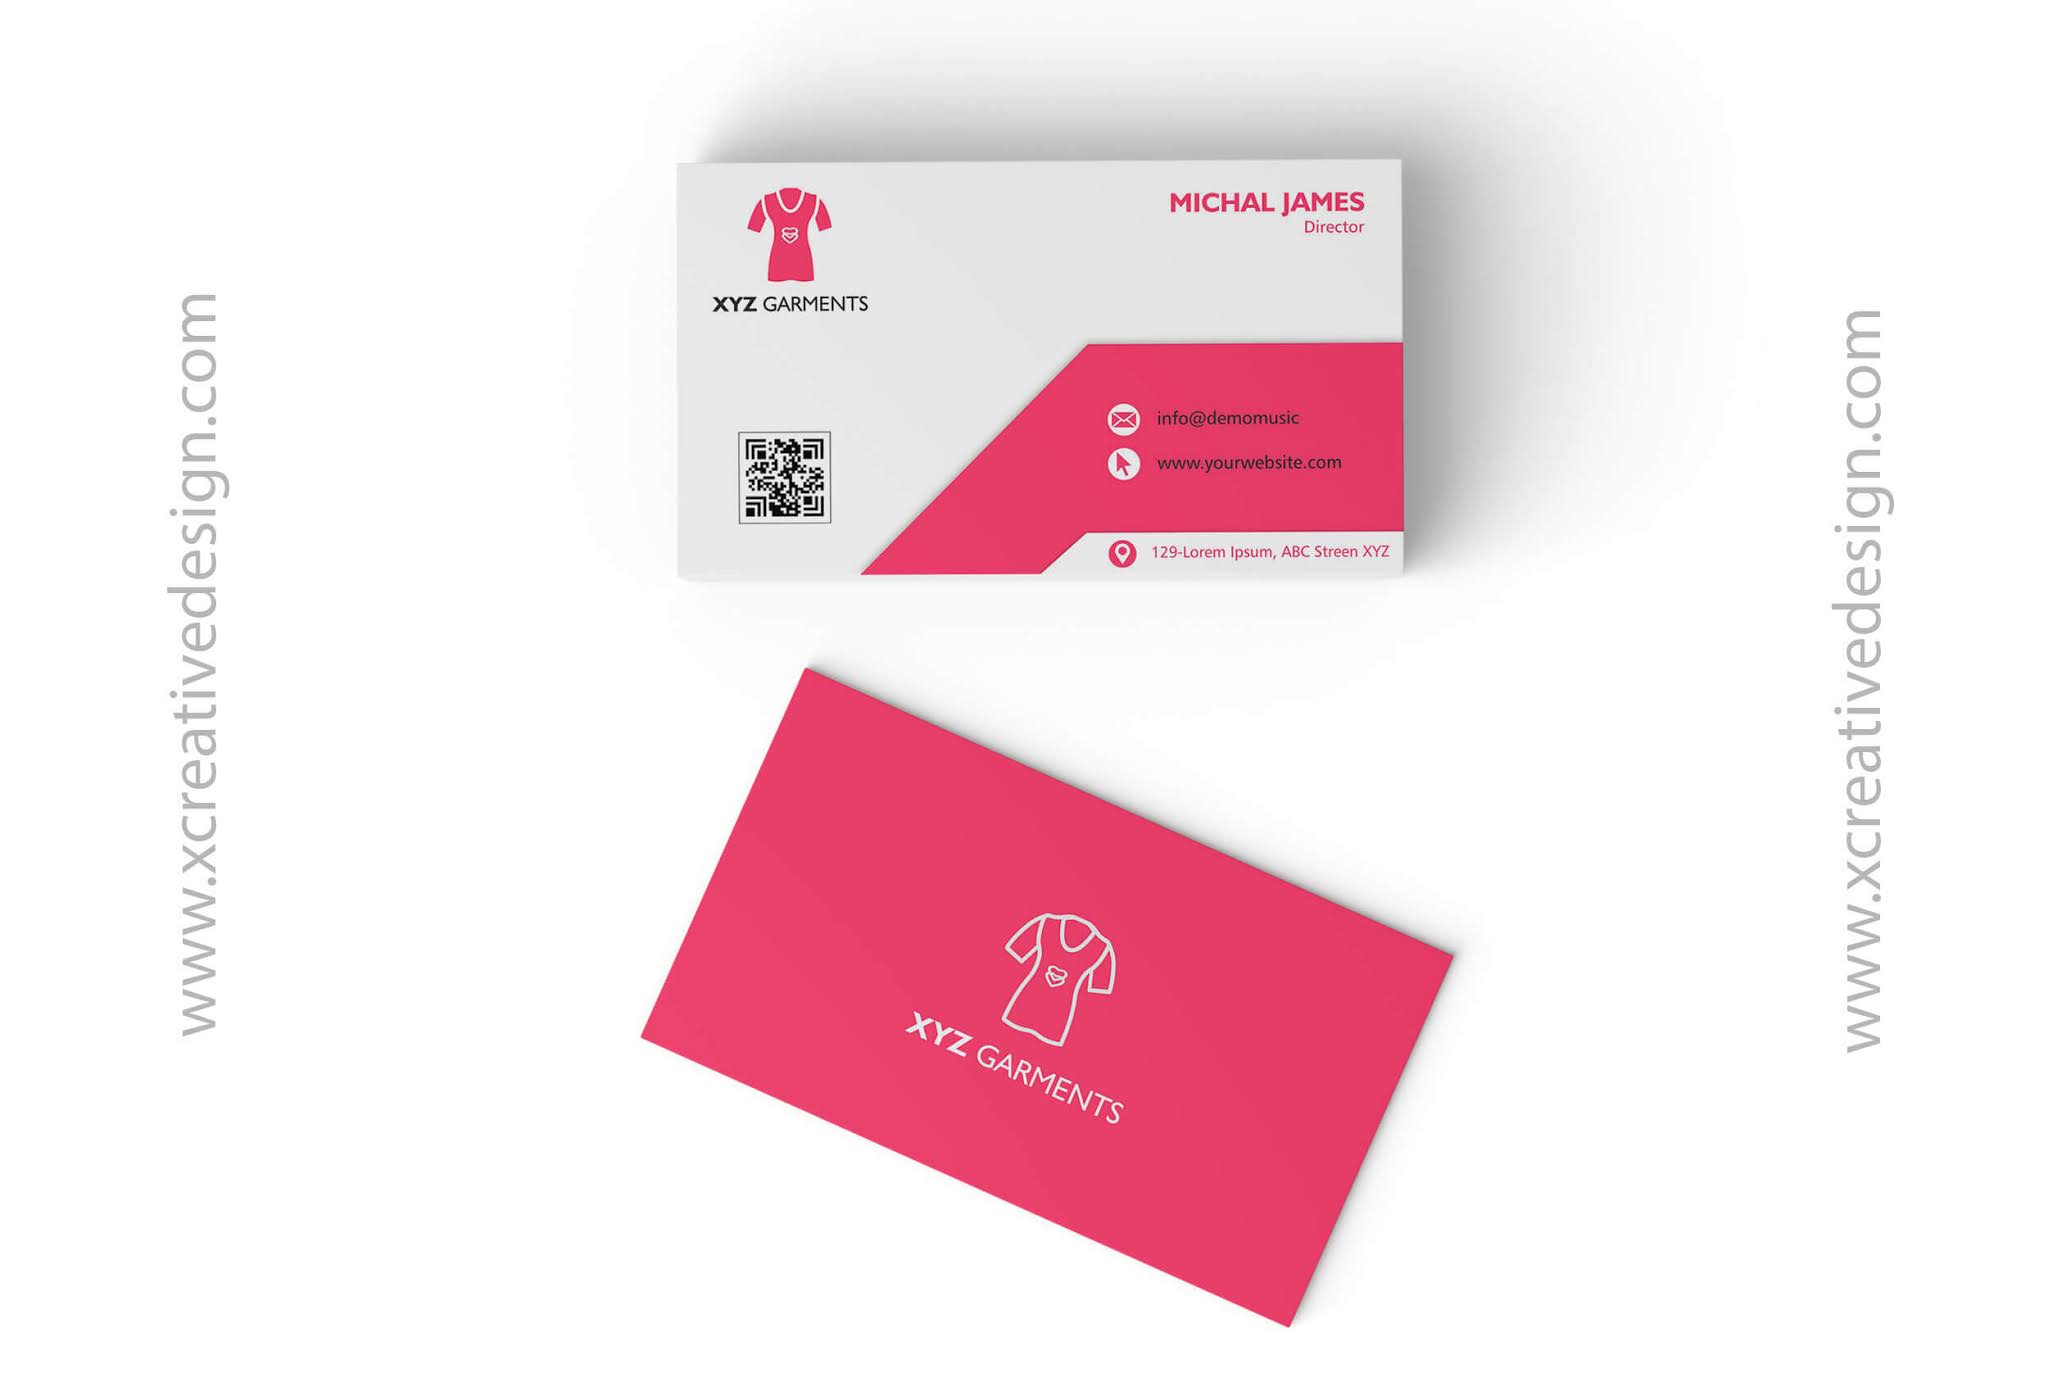 garments-visiting-card-design-free-cdr-download-xcreativedesign